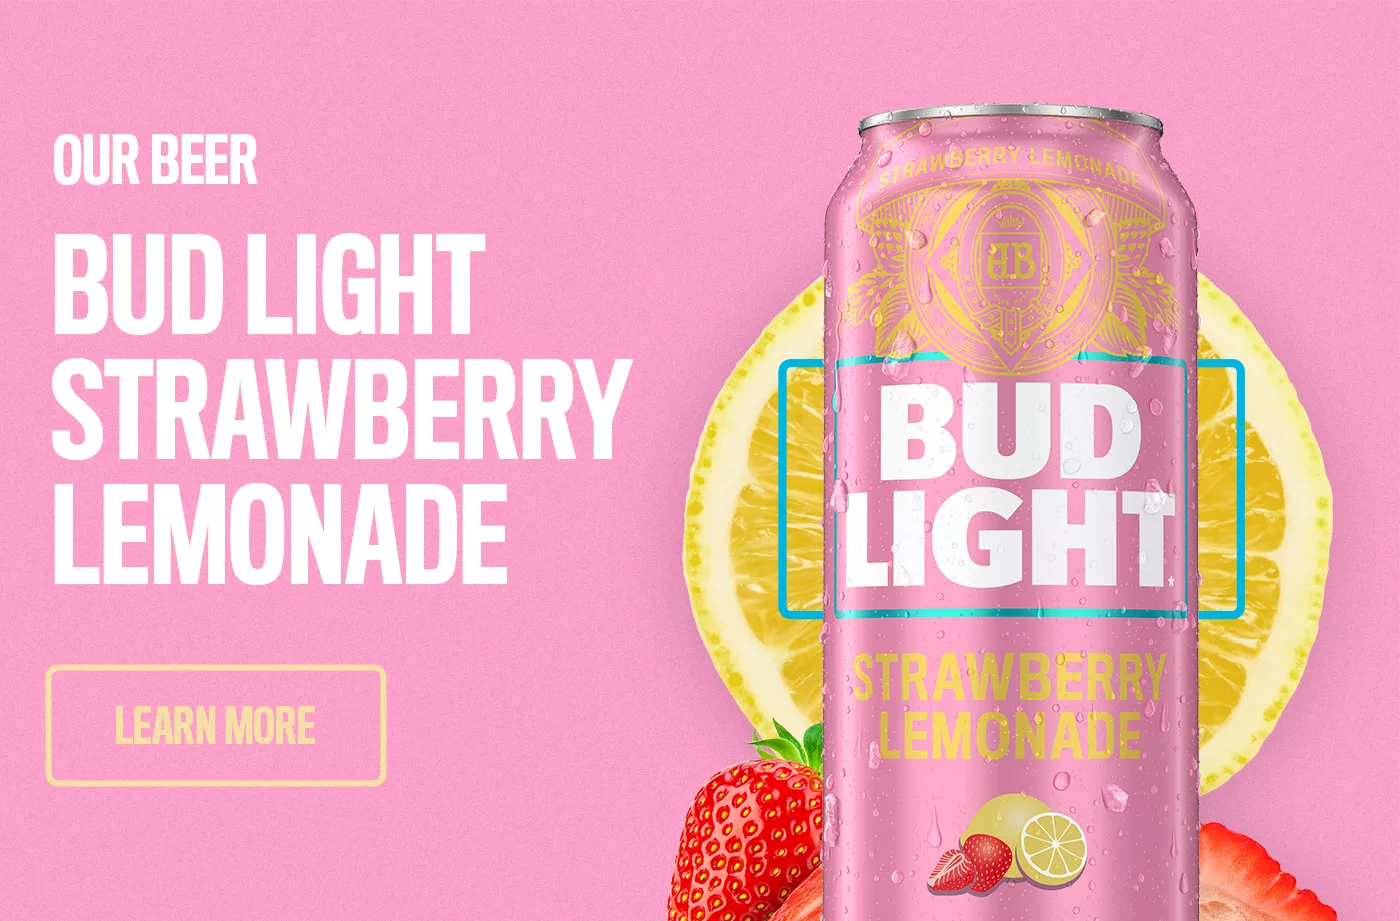 Learn more about our new Bud Light Strawberry Lemonade